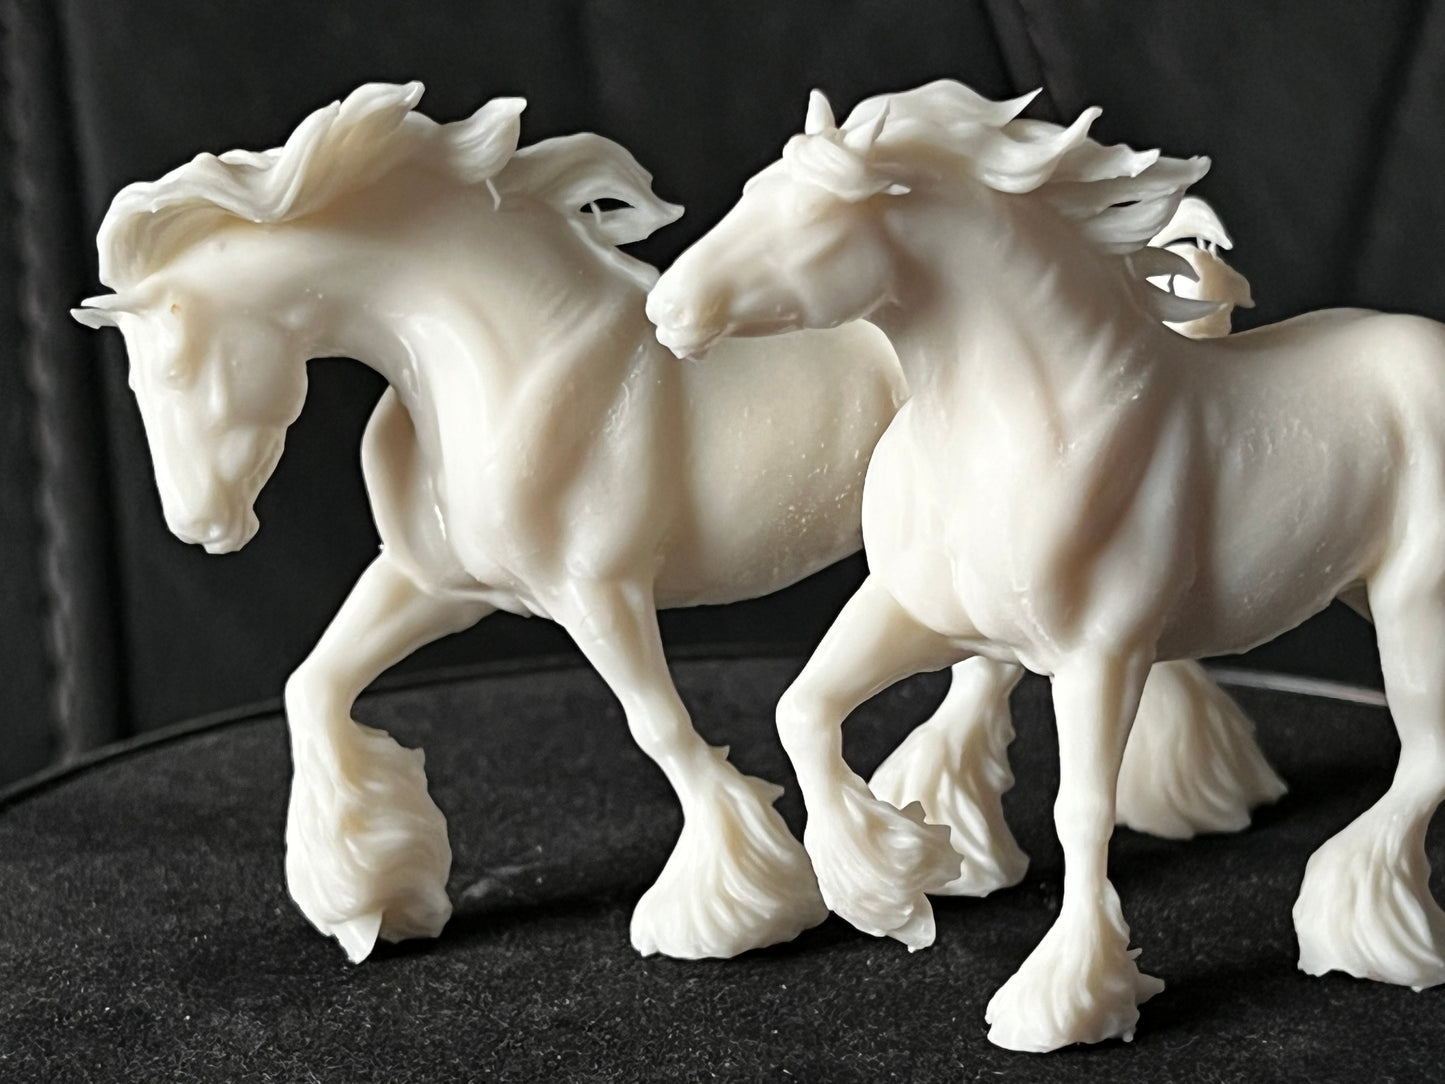 Performance pair of pulling shire mares - White resin ready to prep and paint  LTD EDITION